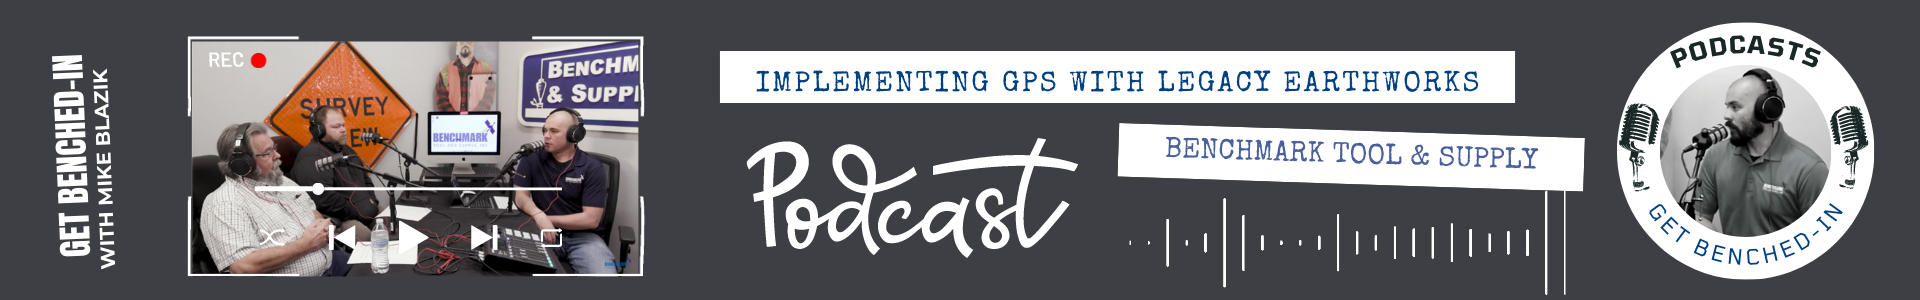 Implementing GPS with Legacy Earthworks